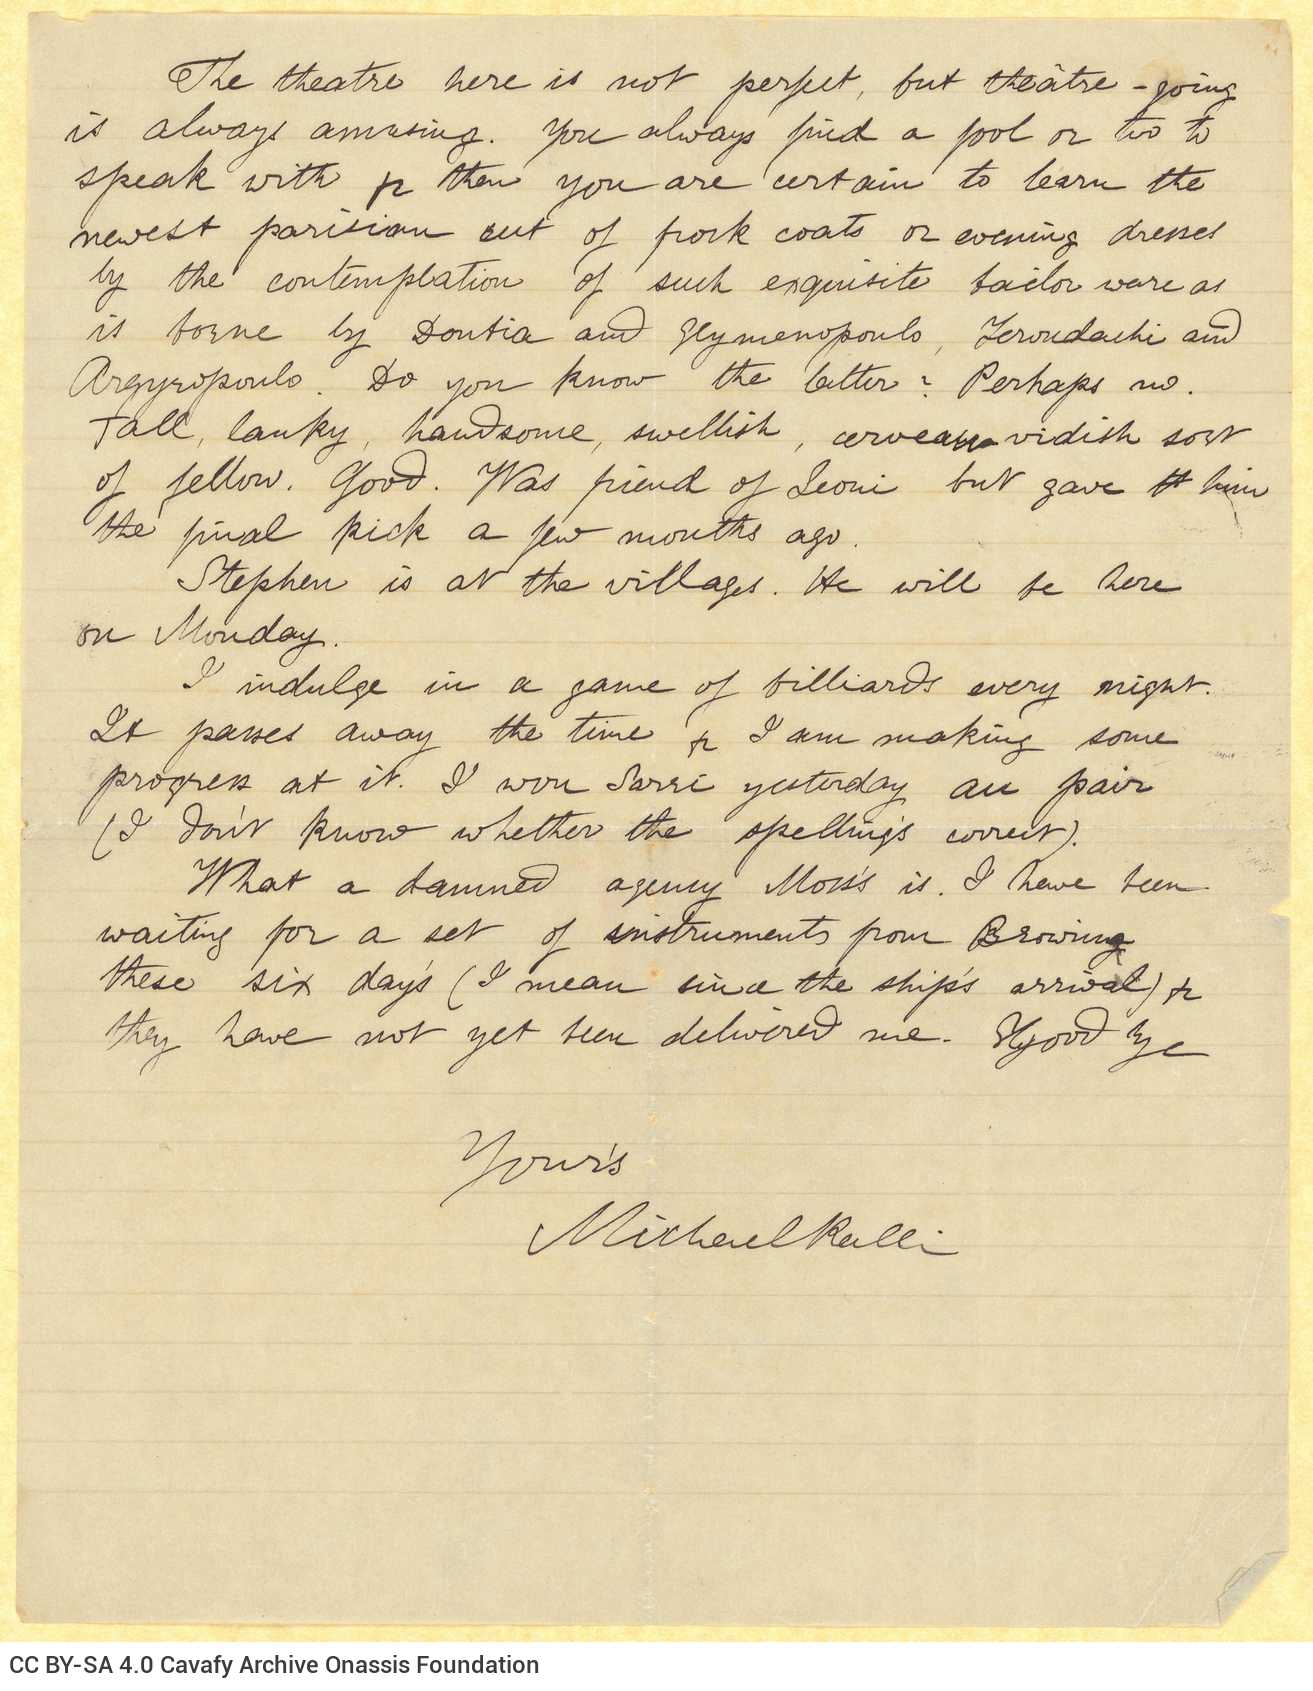 Handwritten letter by Mike Ralli to Cavafy on the recto of two sheets. Commentary on persons from the social circle of Alexan